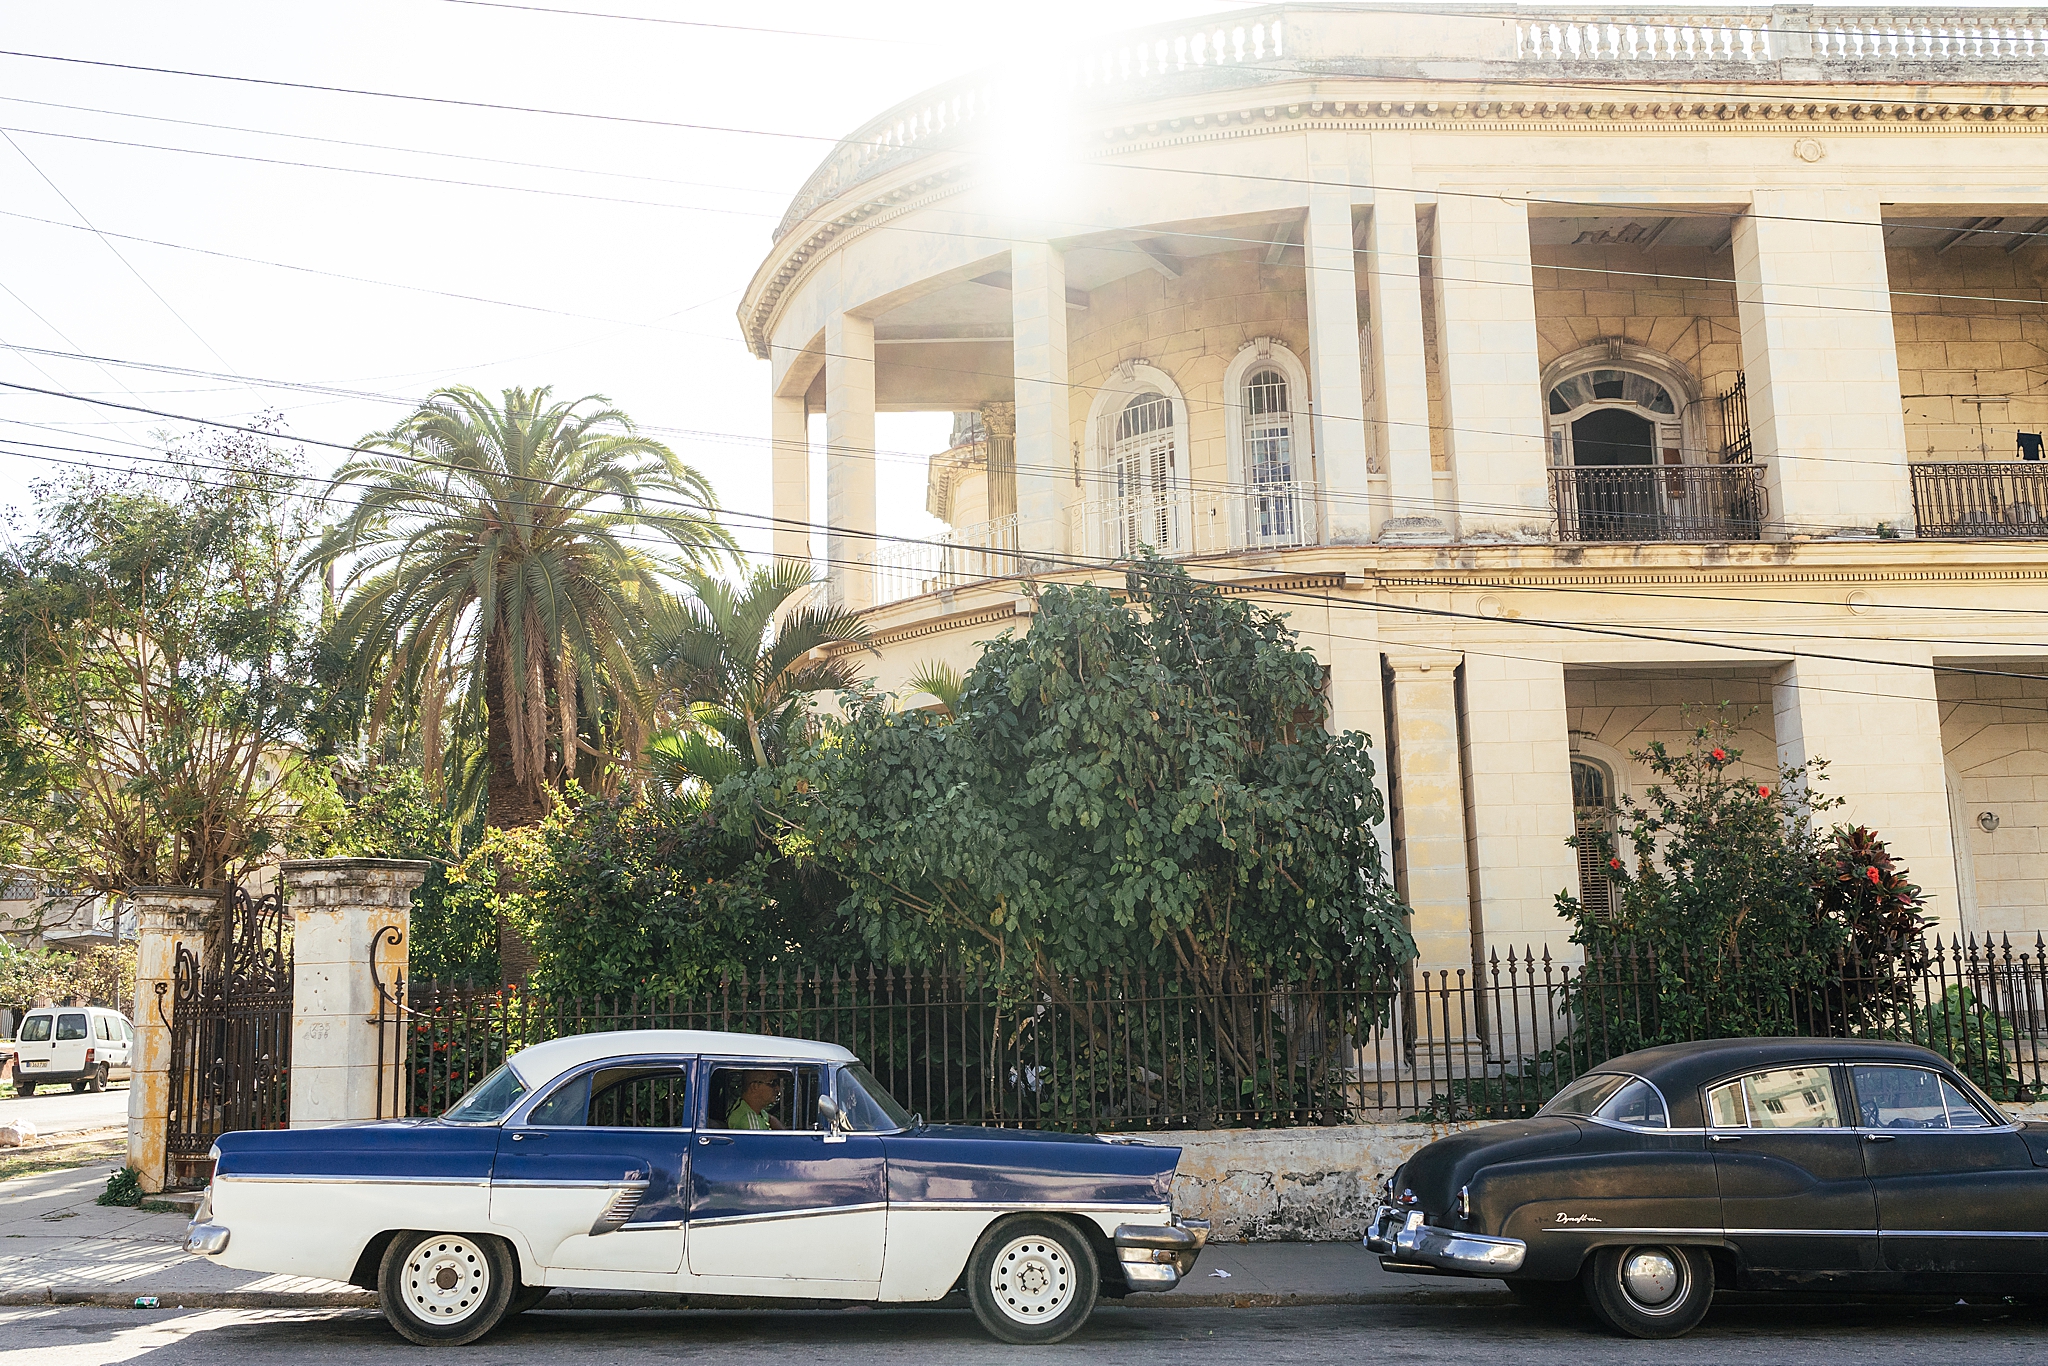  old cars and mansions of Havana Cuba 